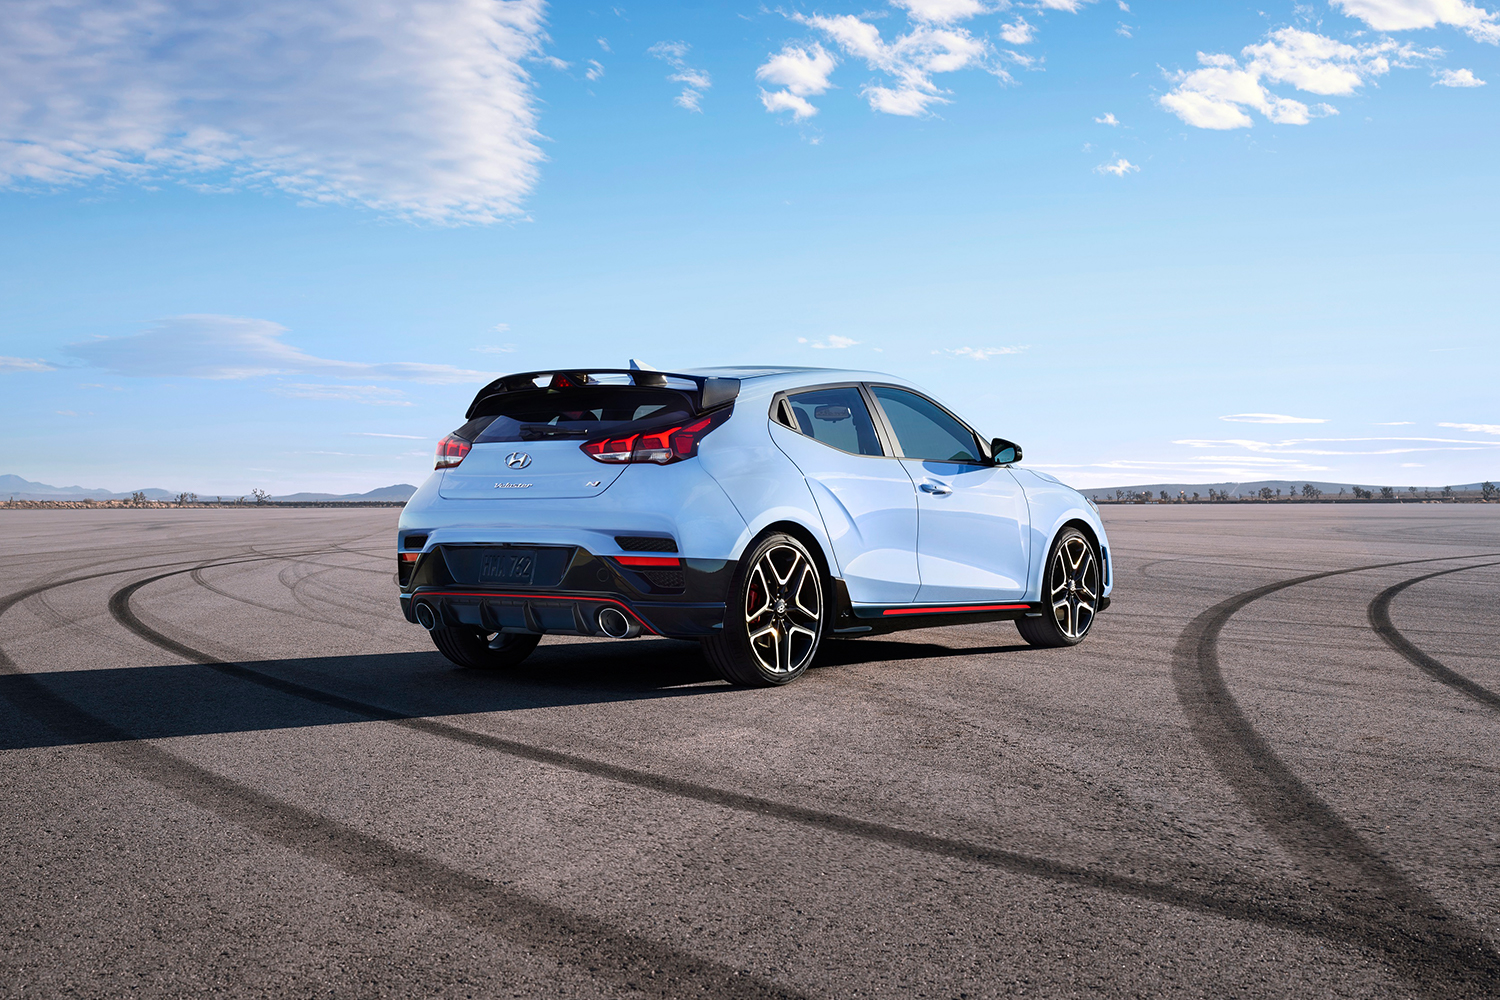 2022 Hyundai Veloster N sitting in the middle of a track during the day with clouds in the sky and tire tracks on the pavement